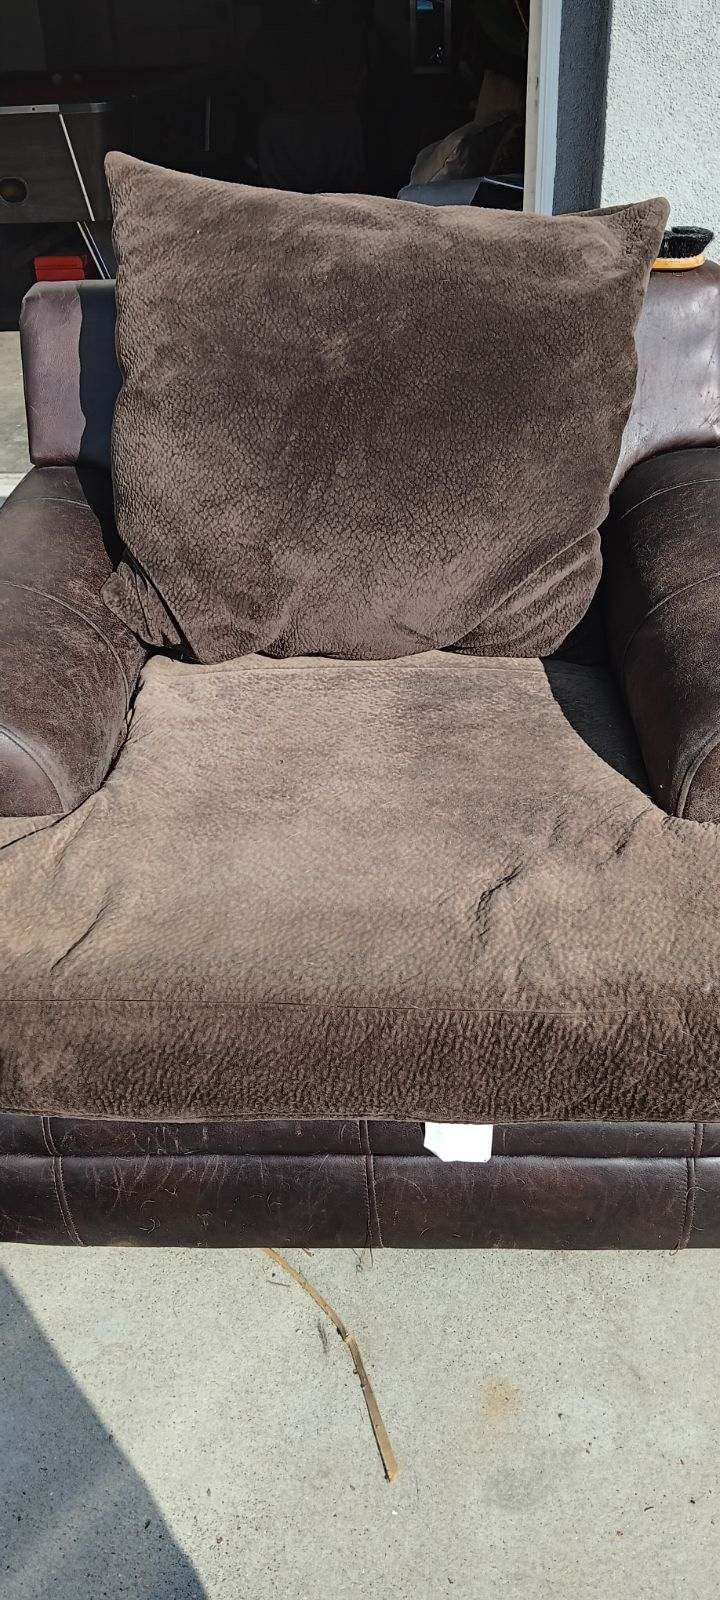 Couch Set For Sale